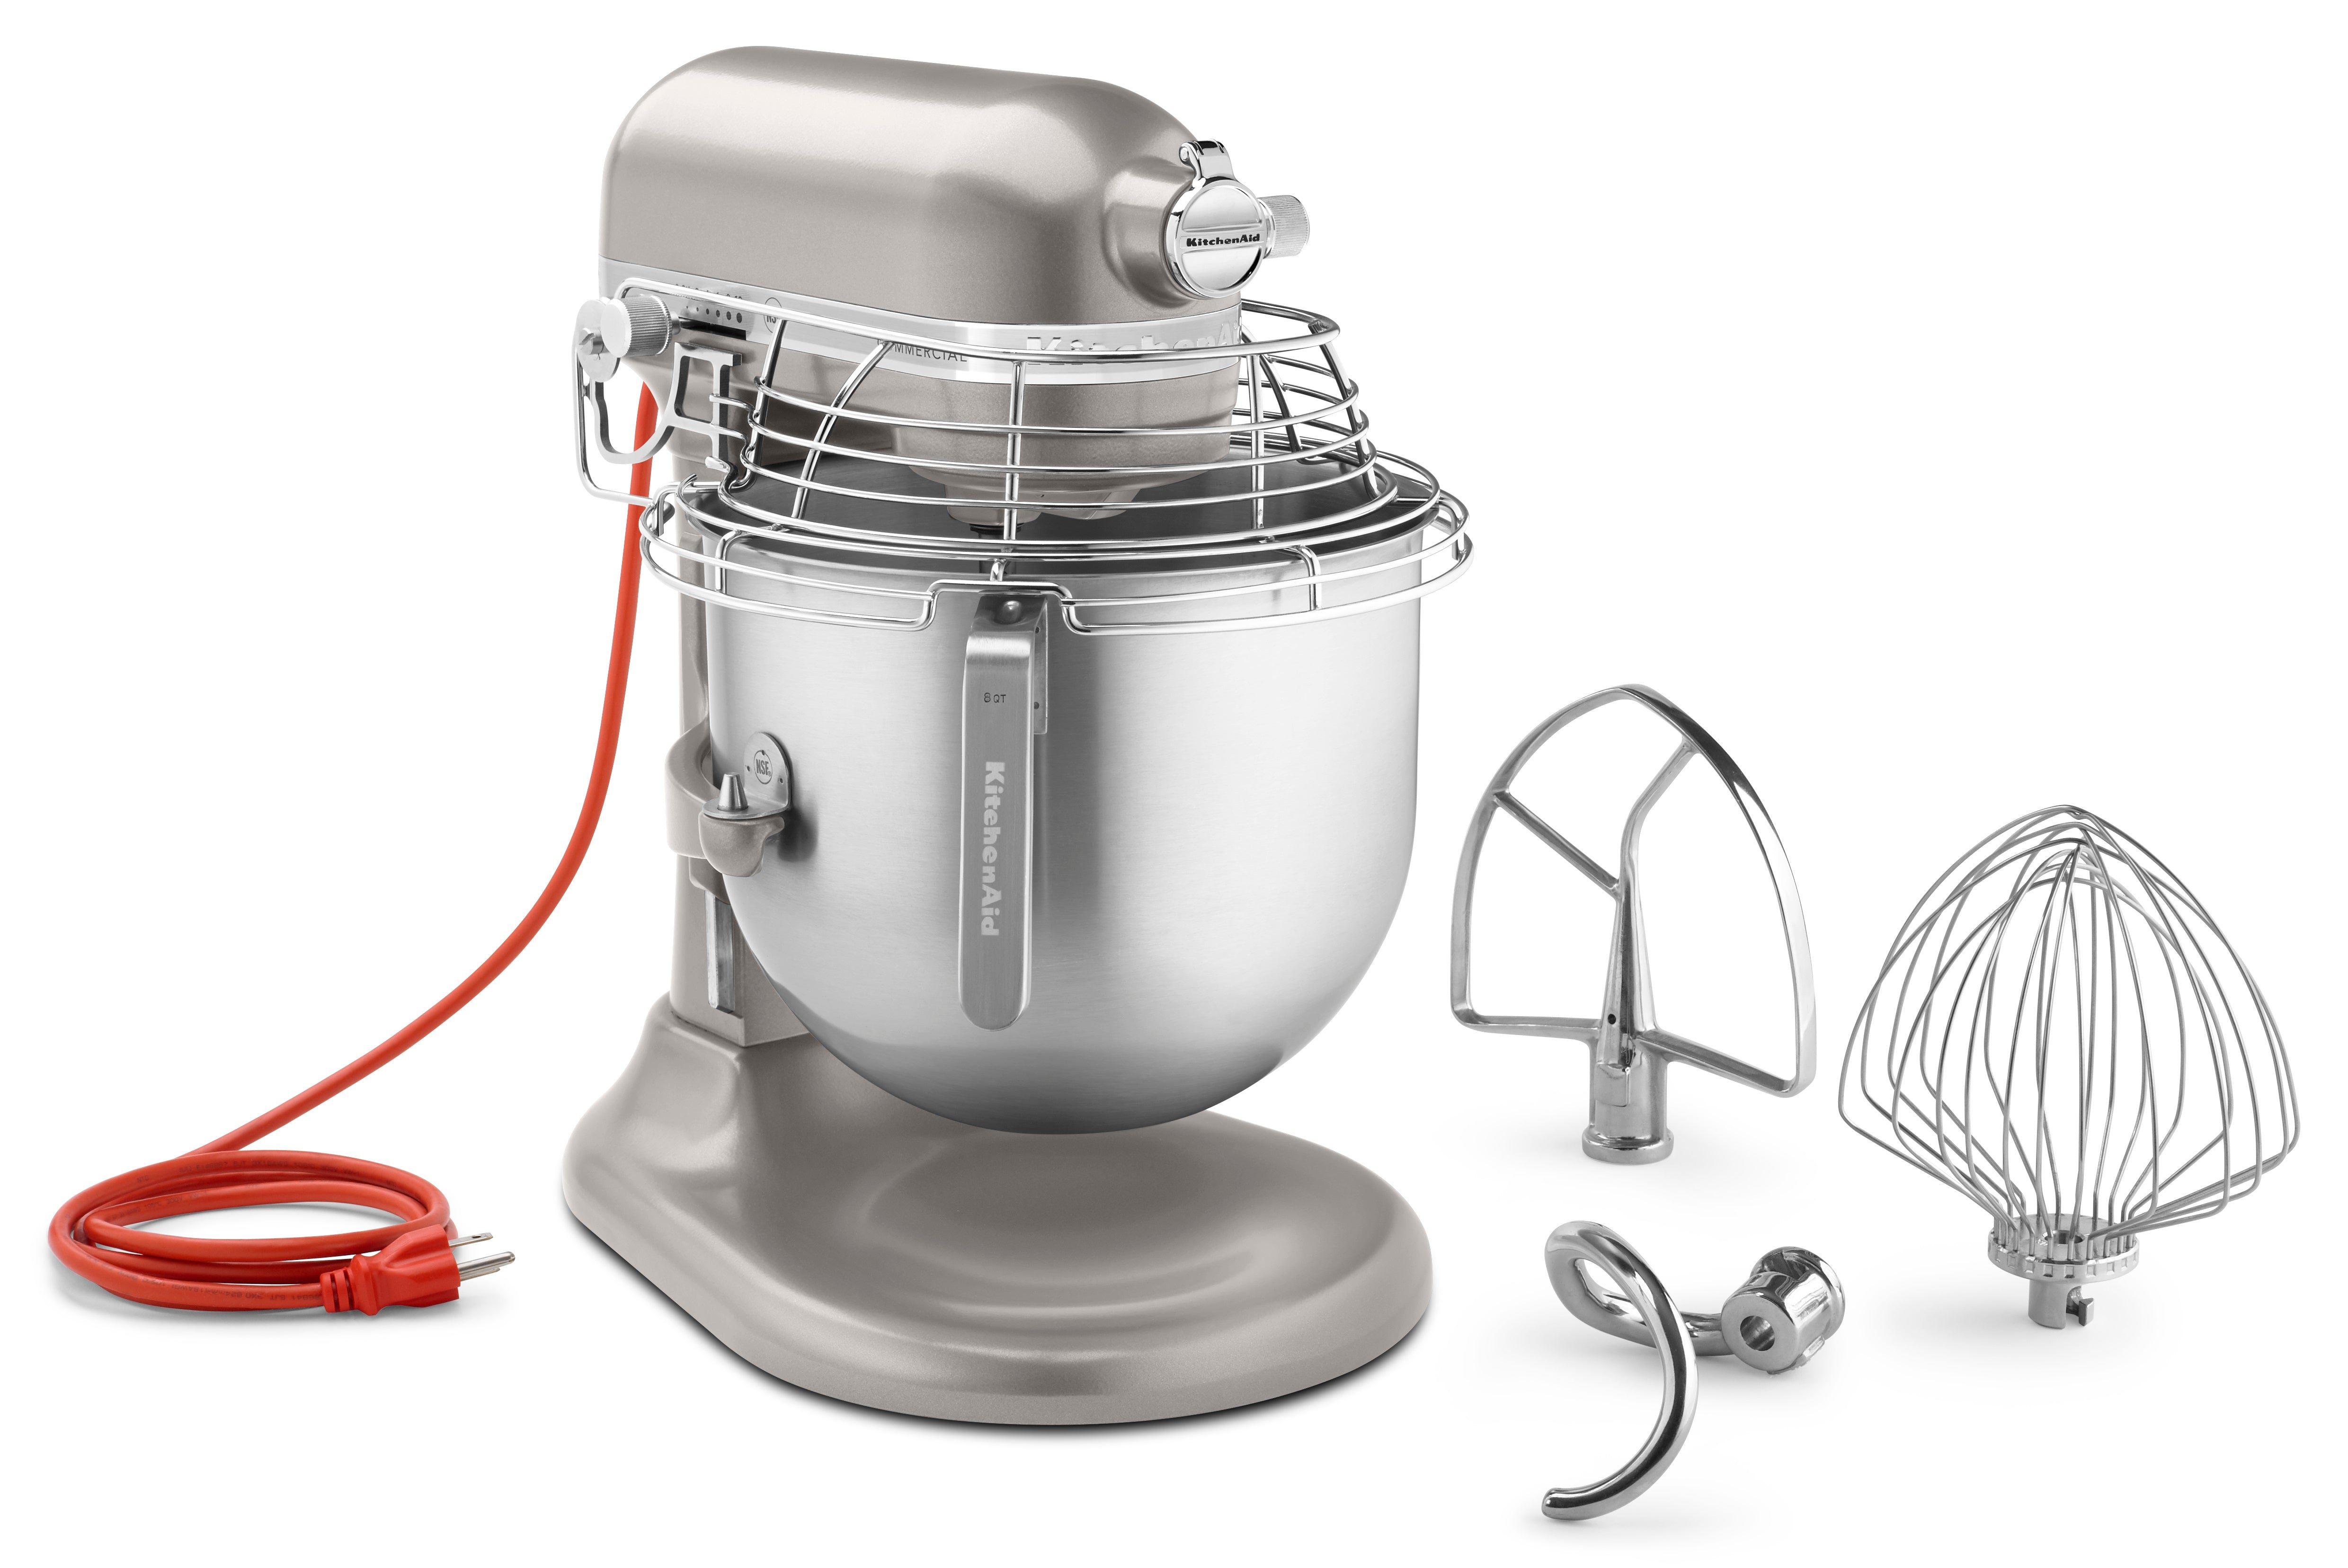  KitchenAid KSMSFTA Sifter + Scale Attachment, 4 Cup, White &  KSMMGA Metal Food Grinder Attachment, Silver: Home & Kitchen